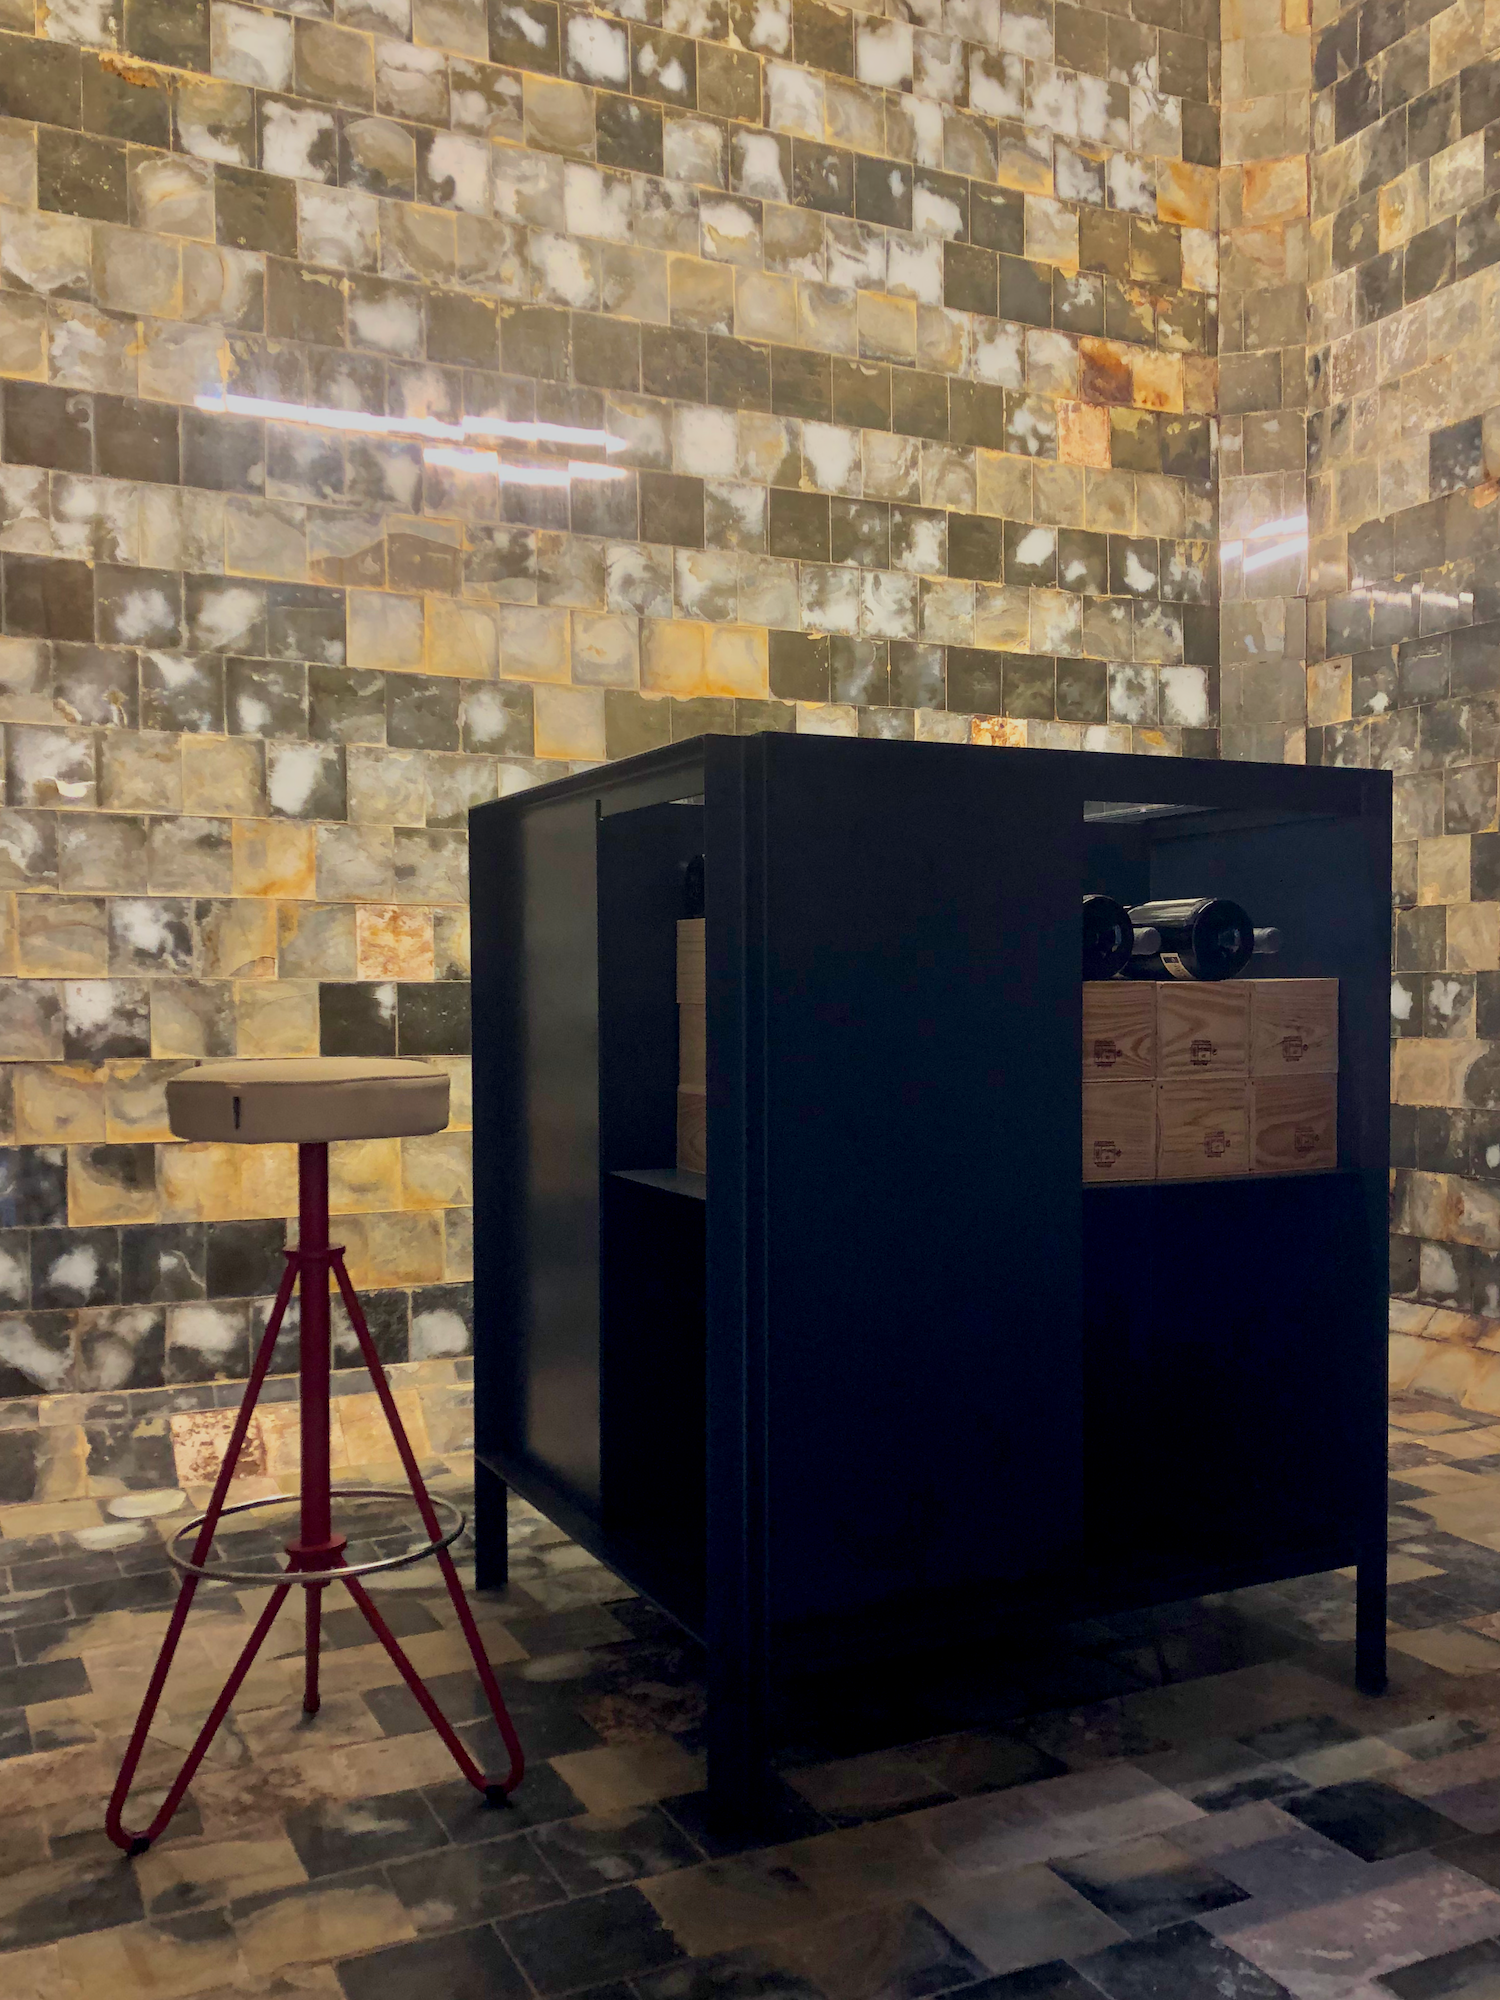 A tile-paneled aging vat repurposed into a private tasting cubicle.